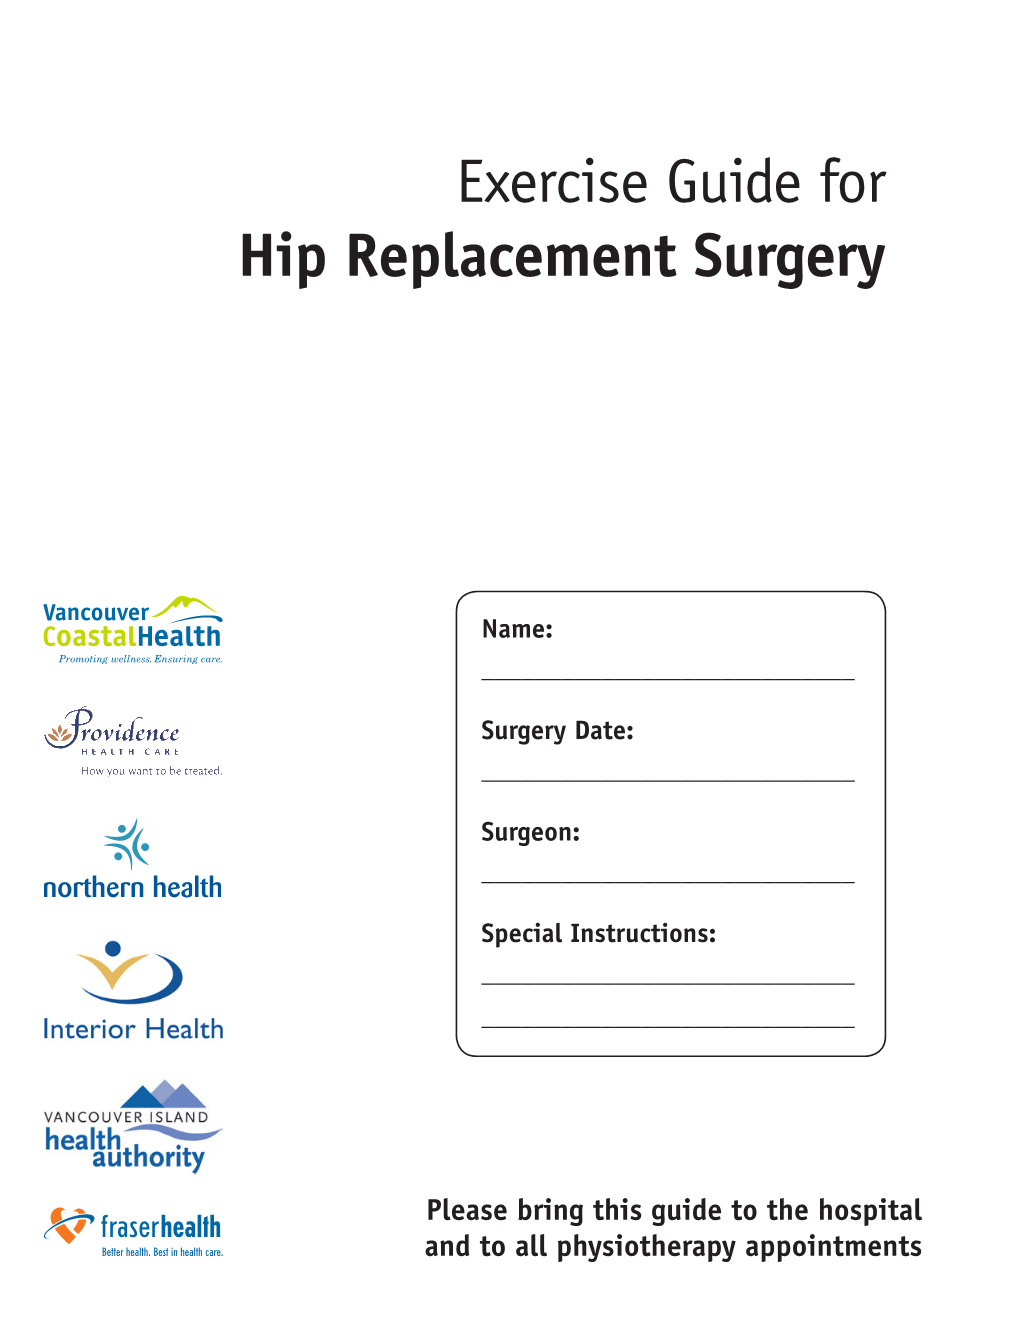 Exercise Guide for Hip Replacement Surgery